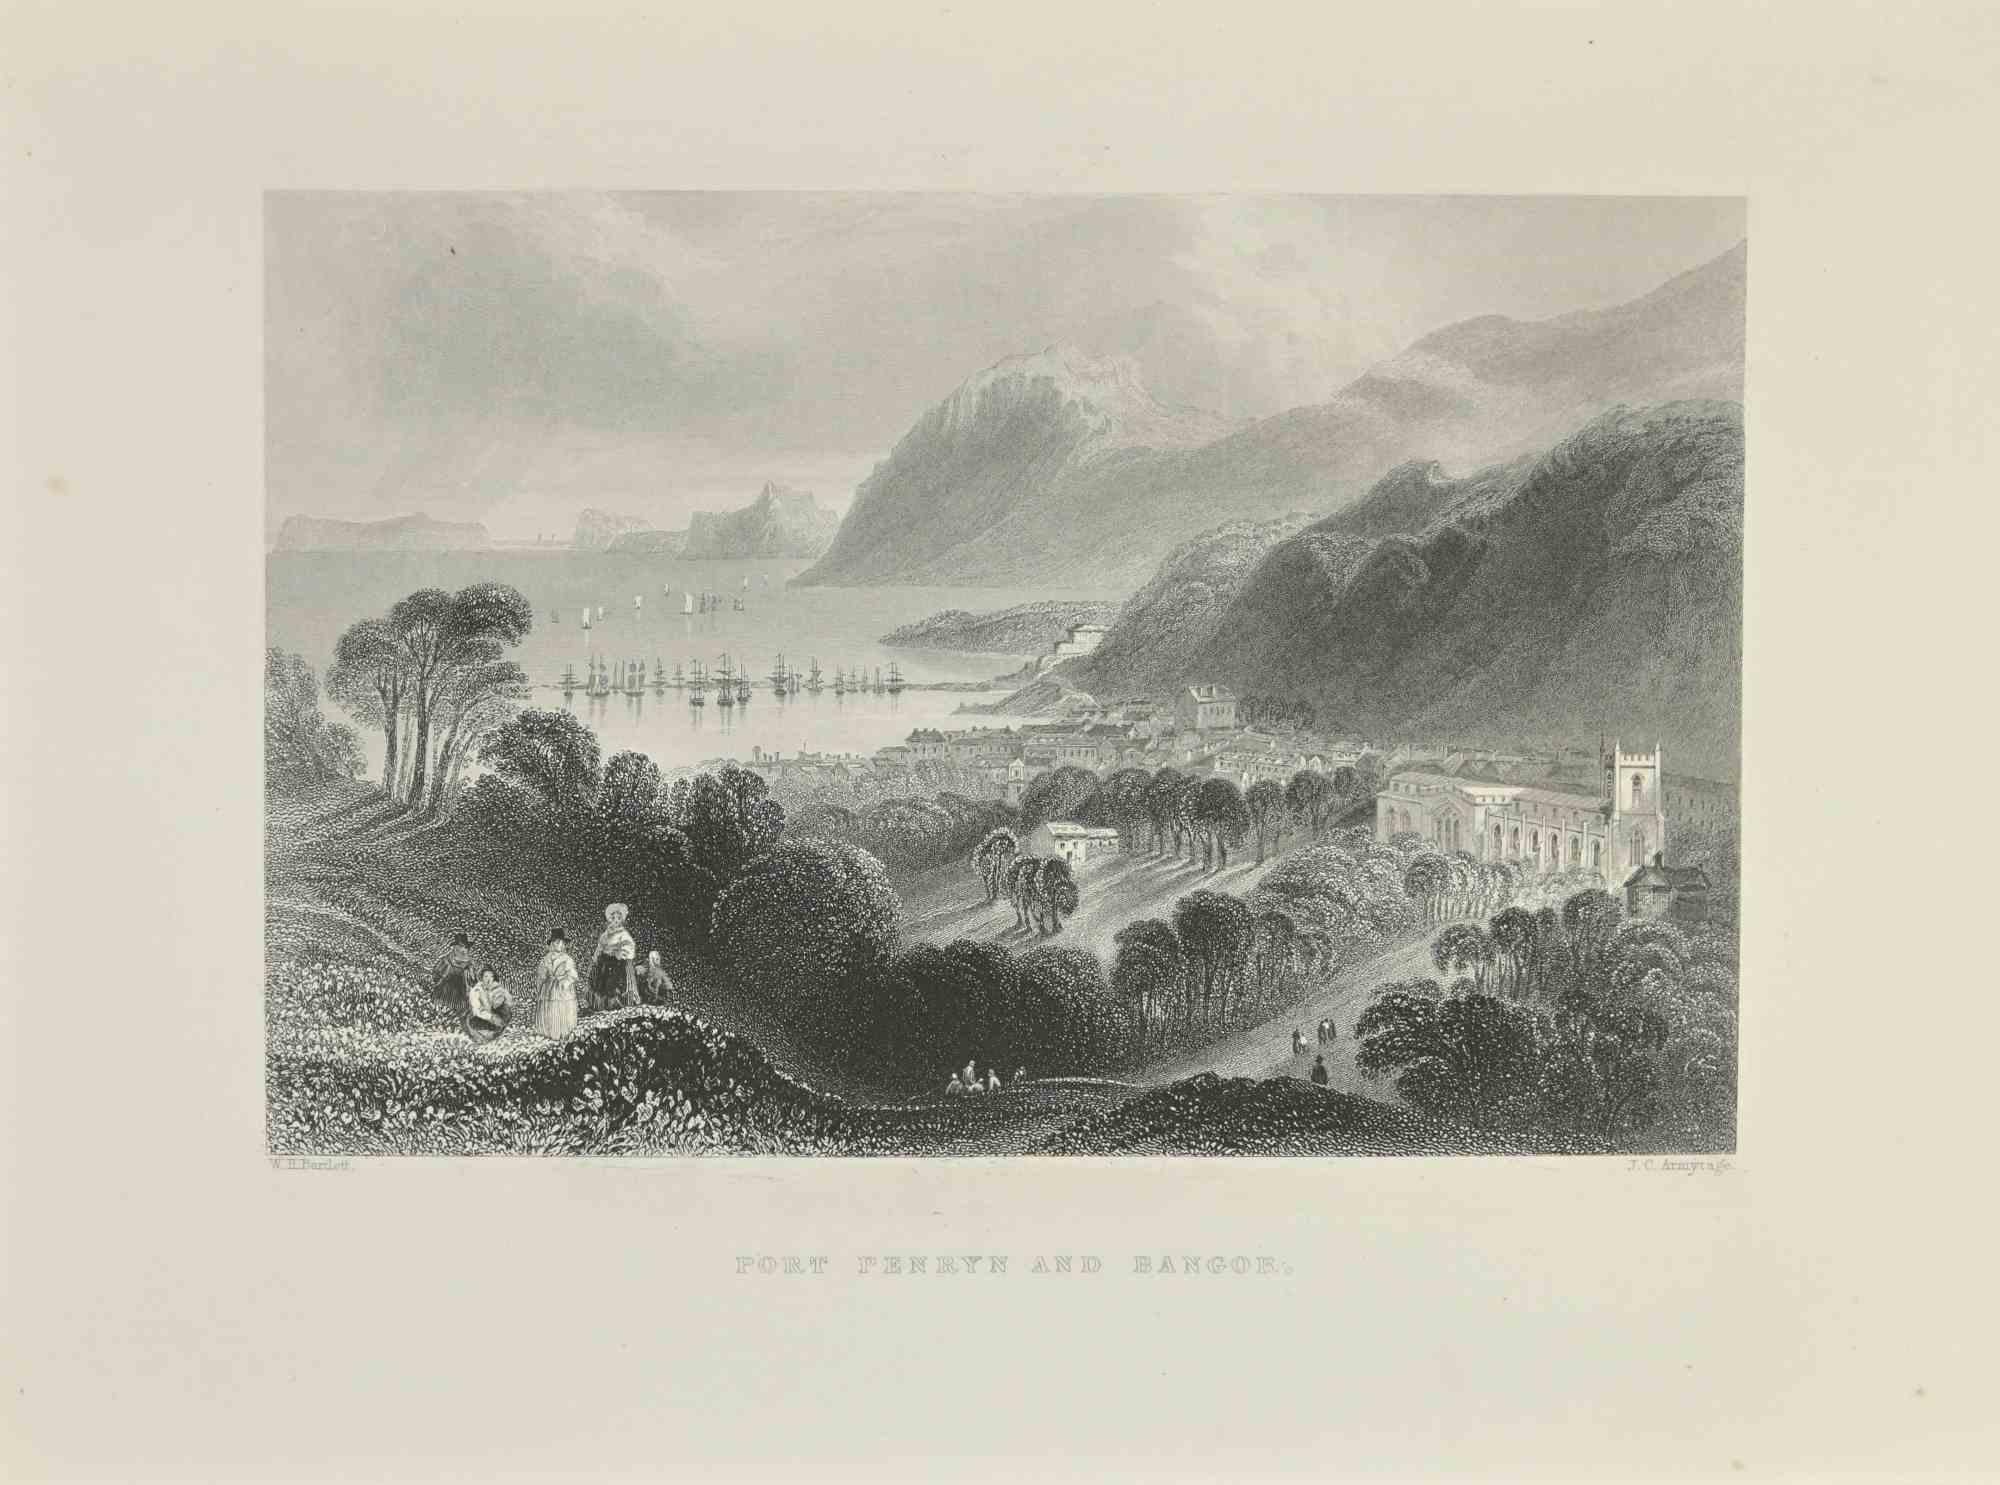 Port Penryn and Bagor is an etching realized in 1845 by J.C.Armytage.

Signed in plate.

The artwork is realized in a well-balanced composition.